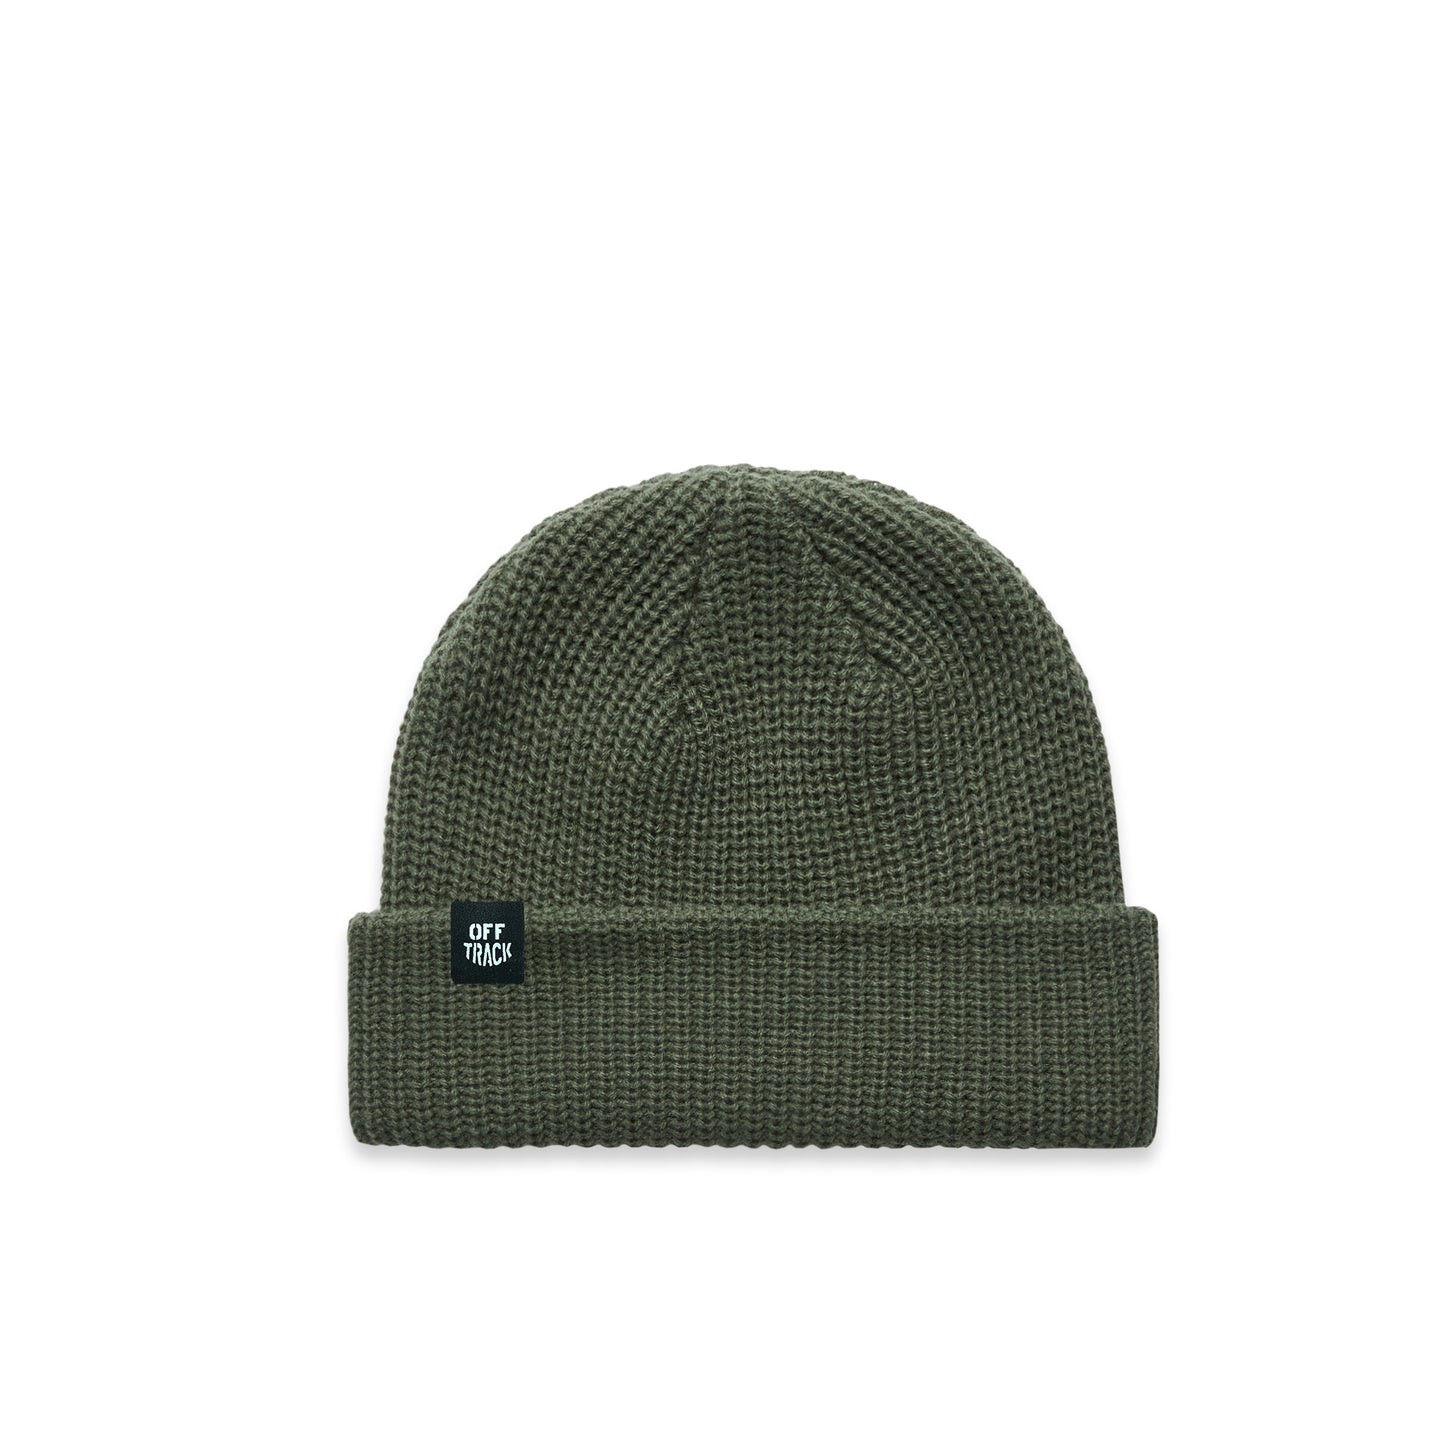 OFF TRACK ENDURO BEANIE -  VARIOUS COLORS